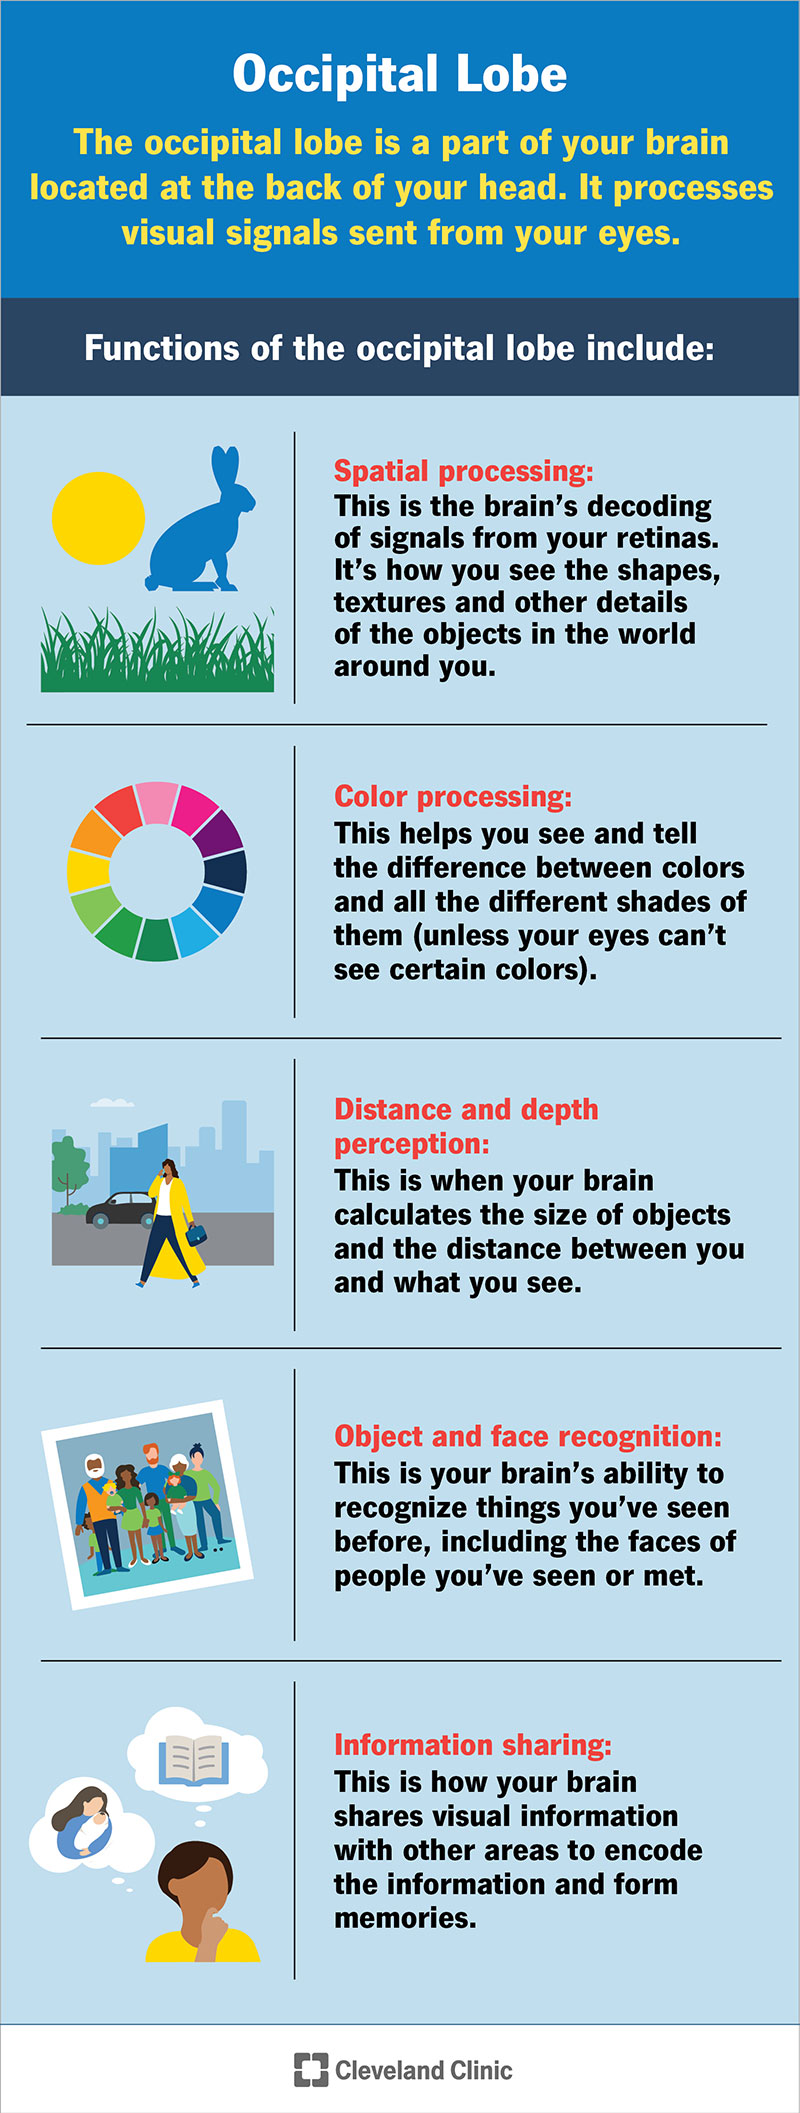 The occipital lobe processes what your eyes see, including shapes, colors, distance and more. It translates signals from your eyes into a form your brain can use.